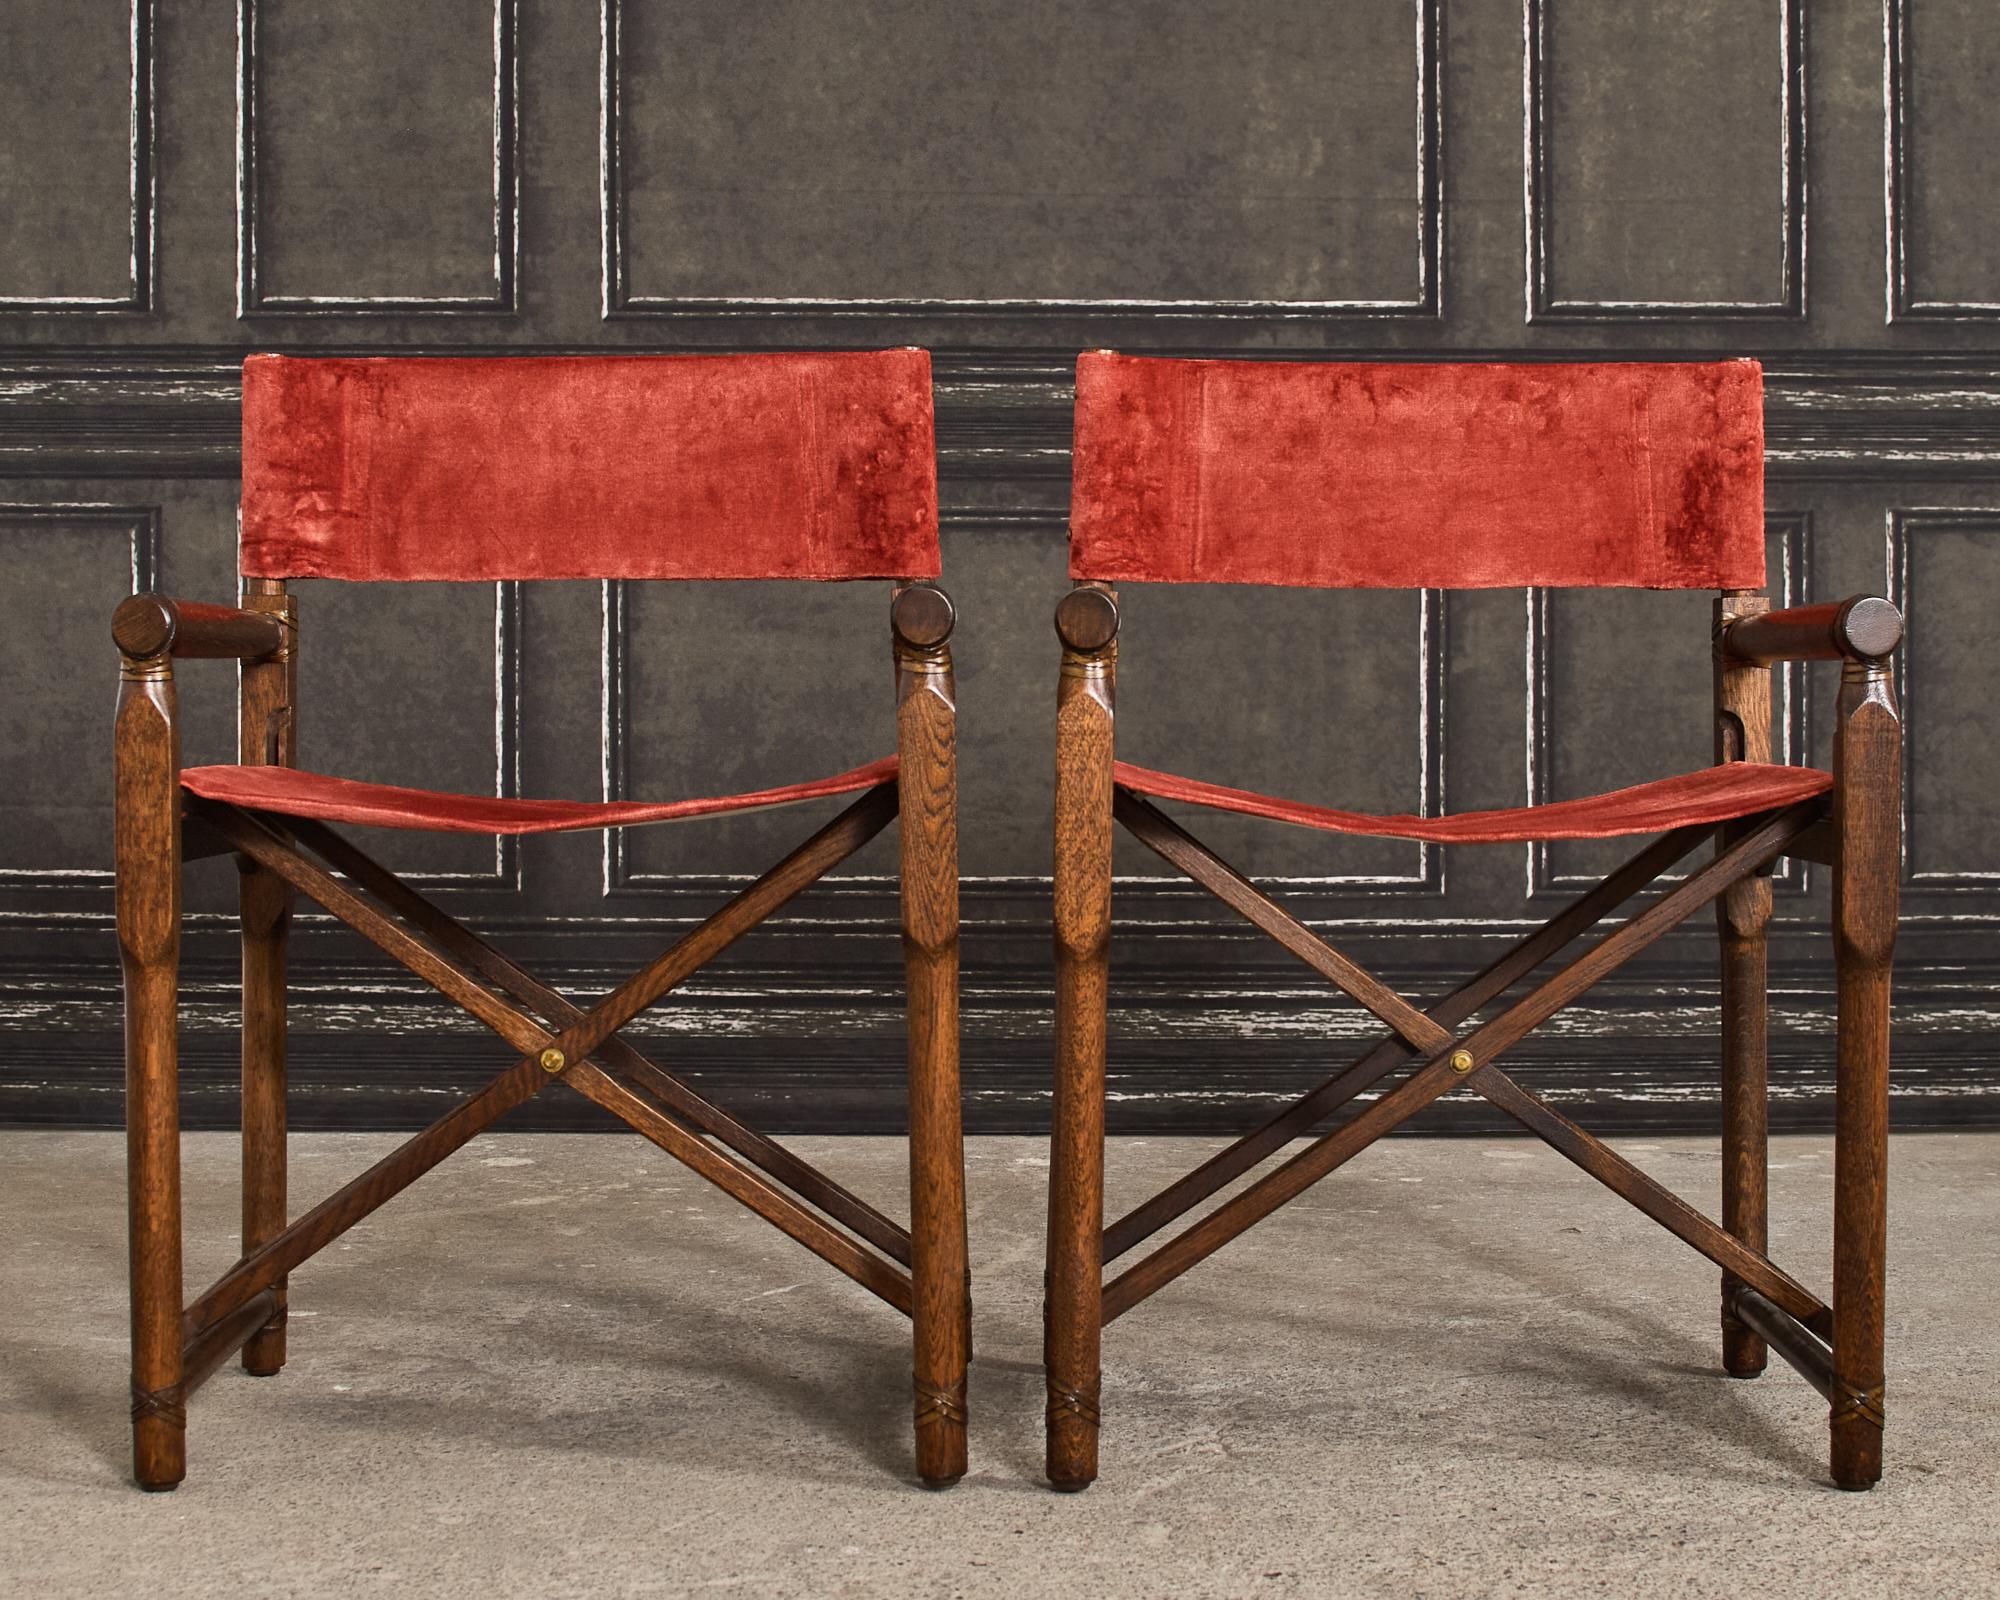 Rare pair of campaign style folding directors chairs made by McGuire. The chairs feature an oak frame instead of the more common rattan pole construction McGuire is known for. The oak frames are fitted with festive paprika color velvet slings. The